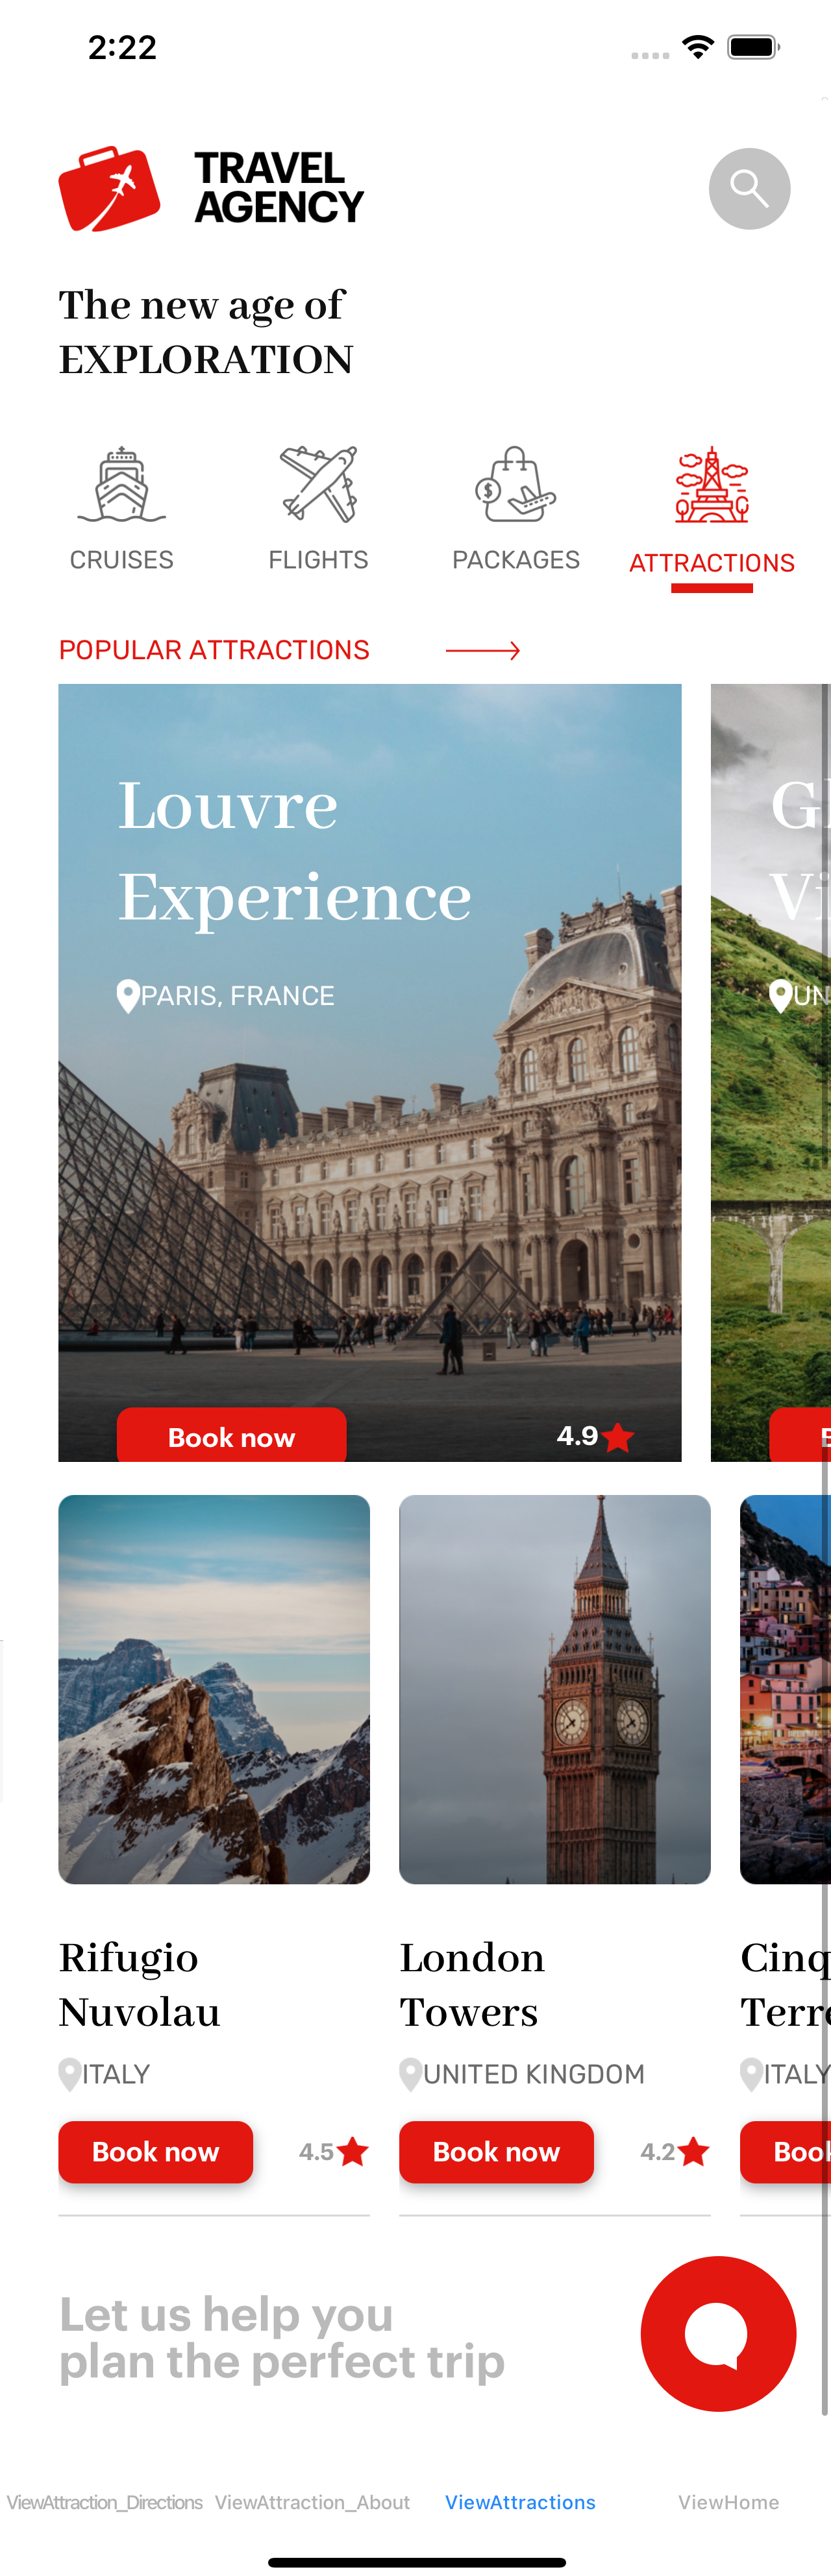 TravelAgency-MobileFrontnend-iOS-Attractions_png